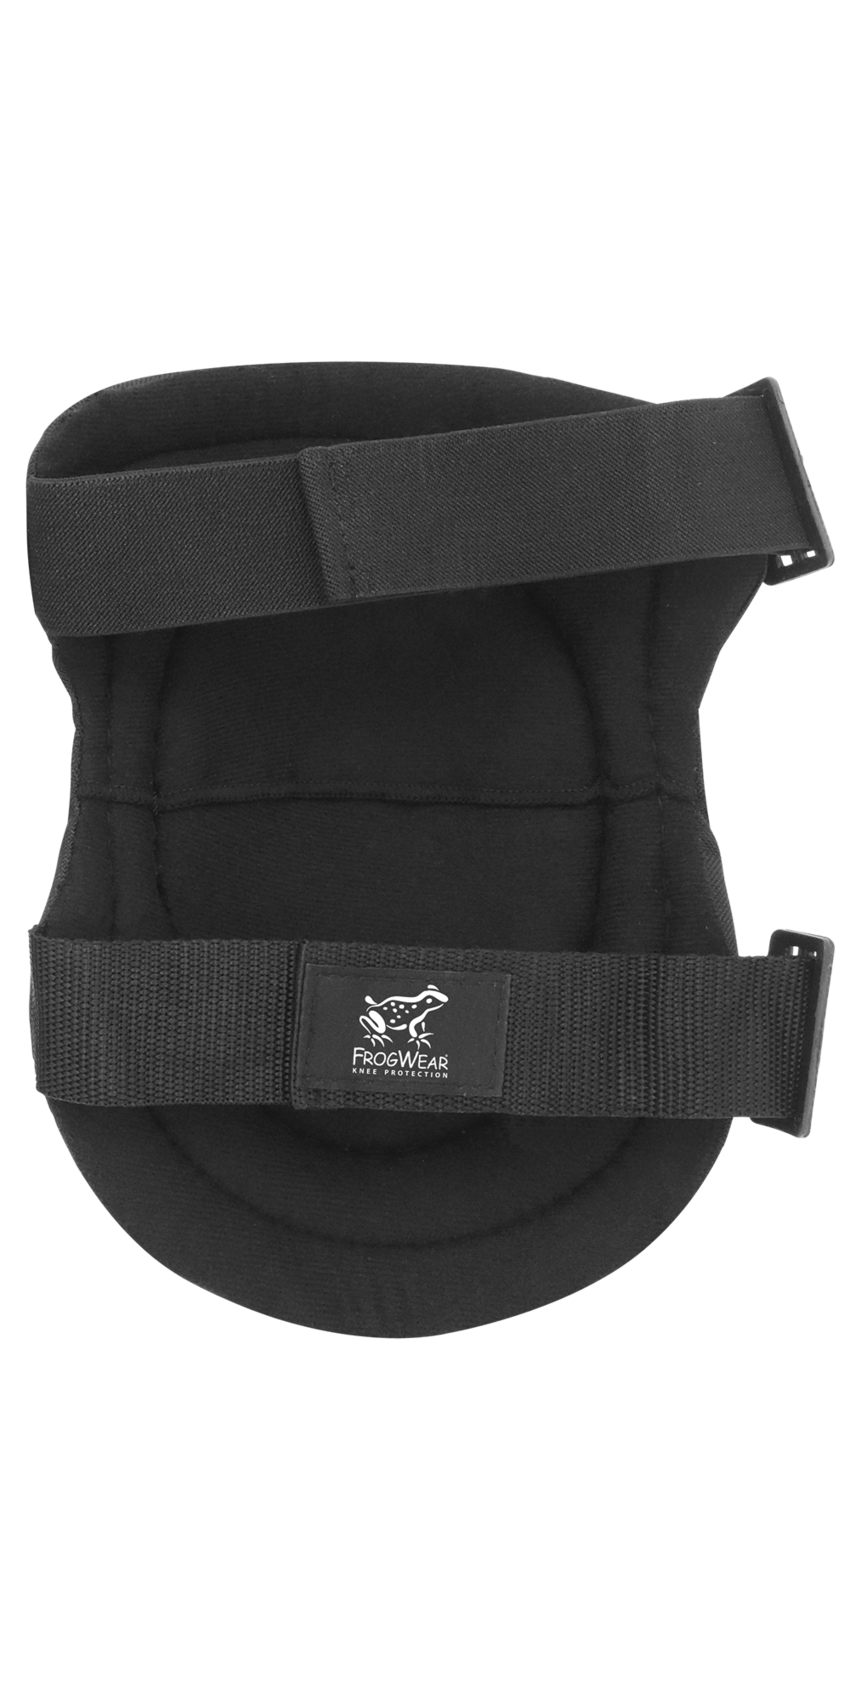 FrogWear™ Knee Protection Gel-Lined Non-Marring Knee Pads